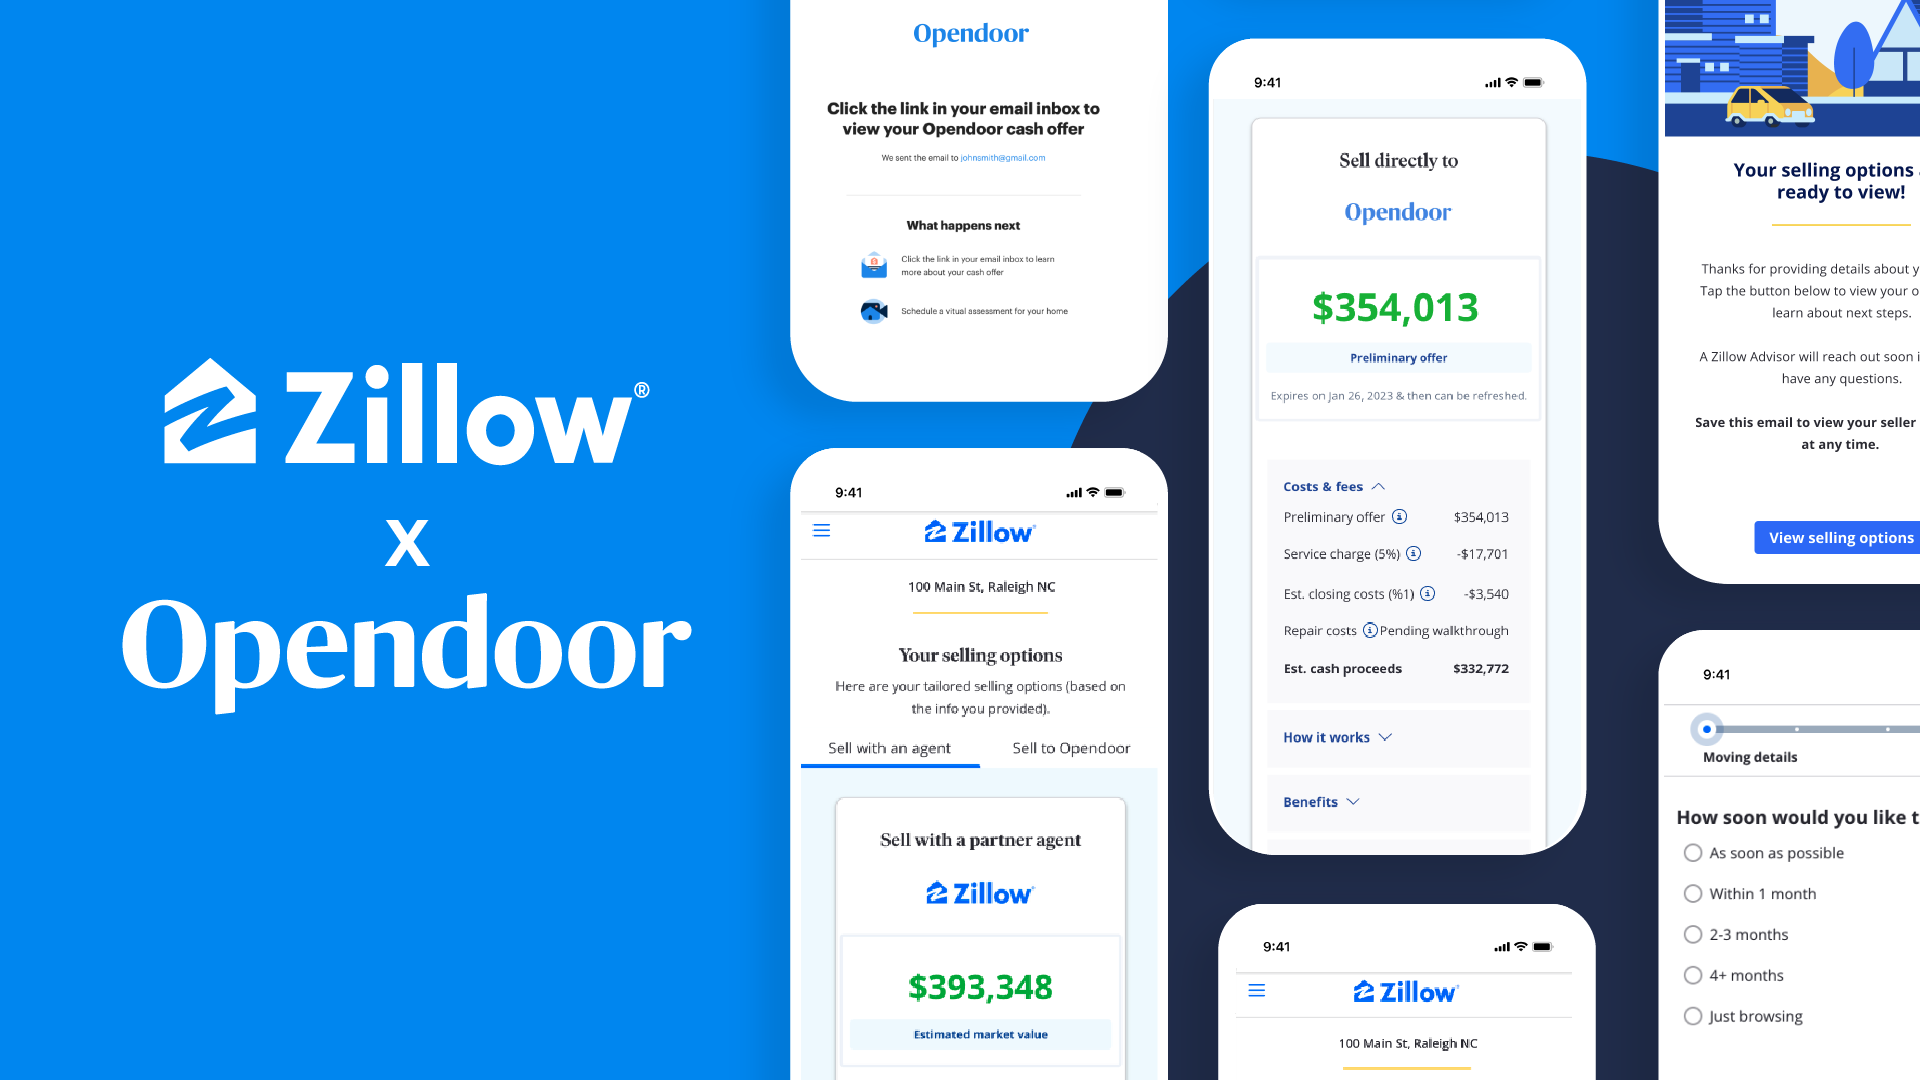 Selling made easier: Zillow customers can now choose between a cash offer from Opendoor or selling with an agent